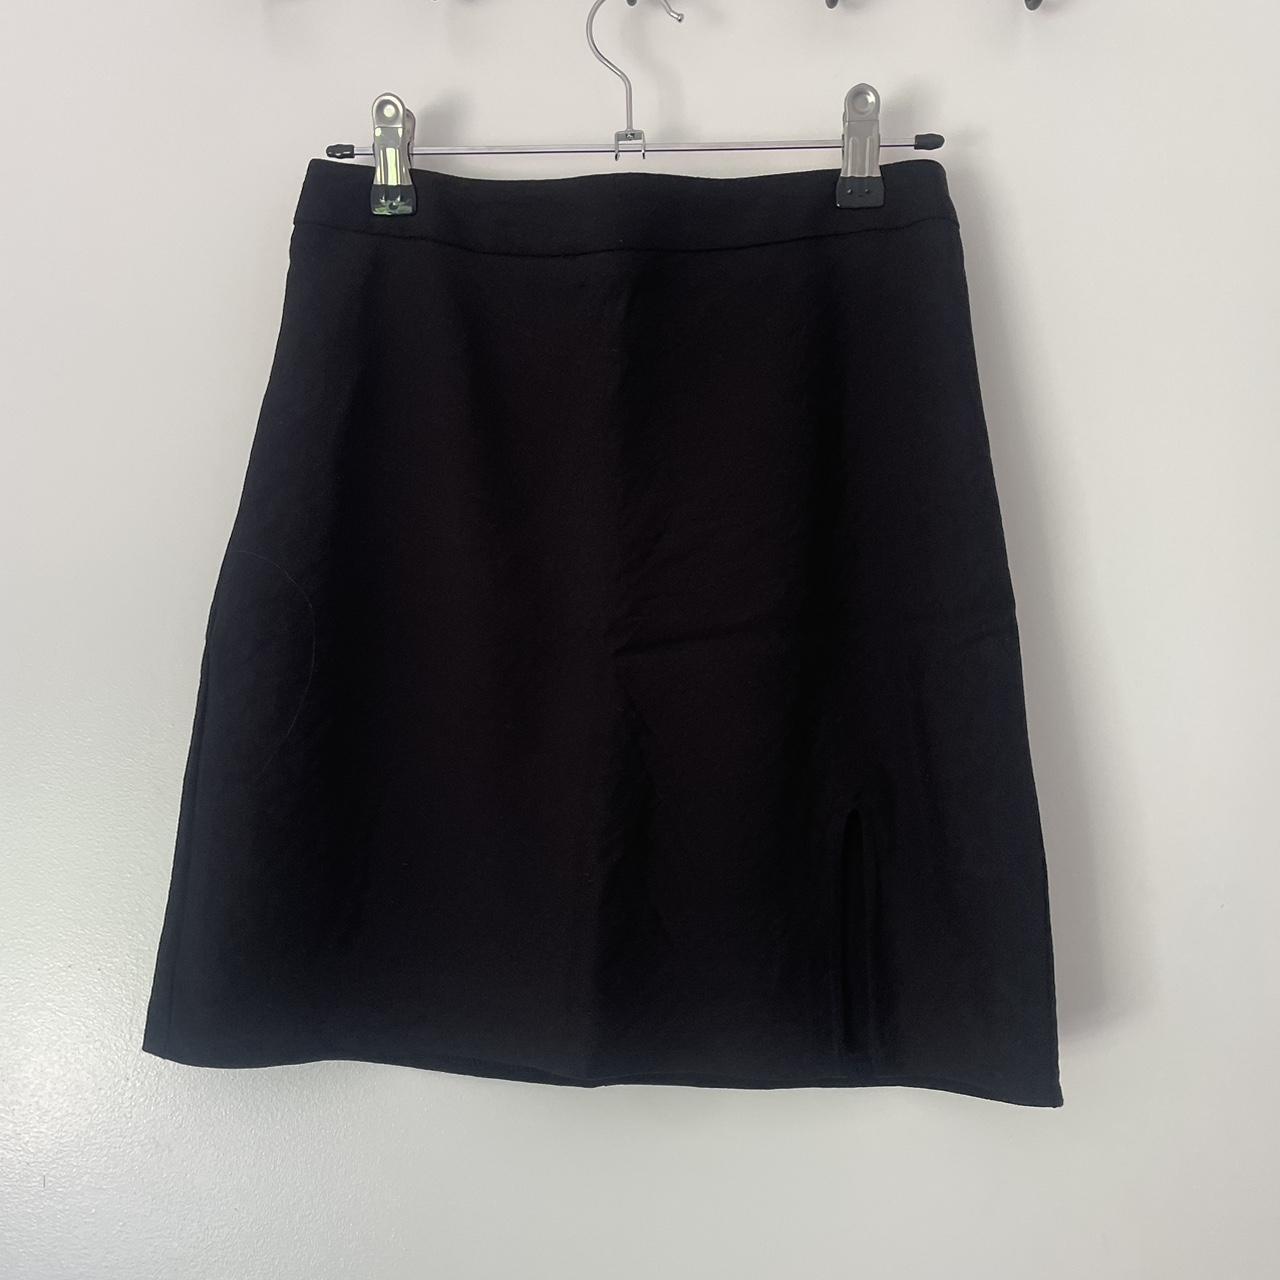 White fox black suits you mini skirt, brand new with... - Depop